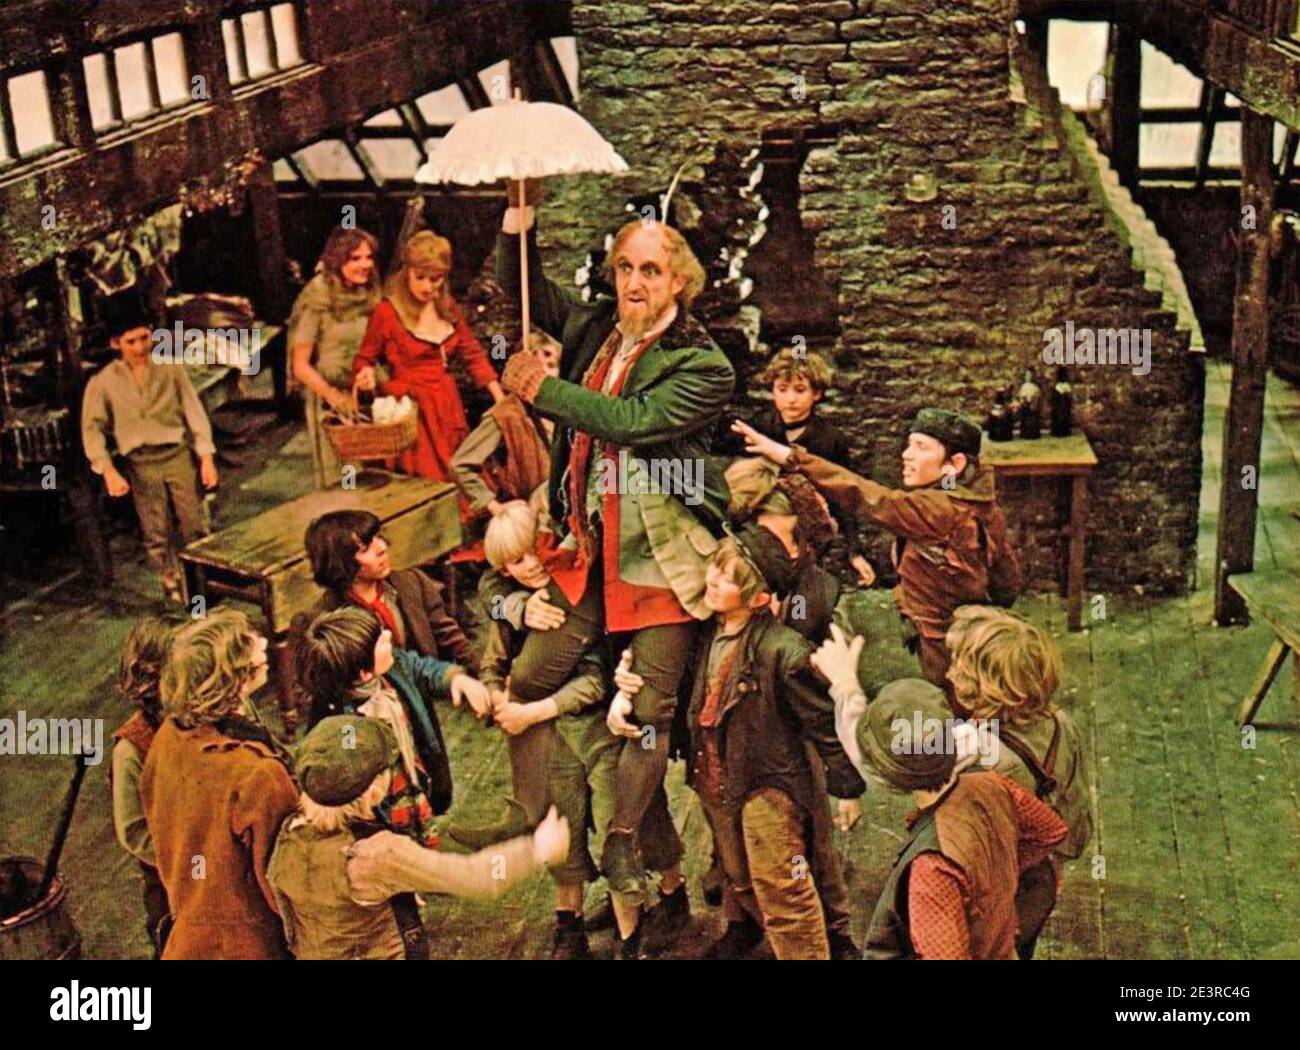 OLIVER 1968 Columbia Pictures film with Ron Moody as Fagin Stock Photo